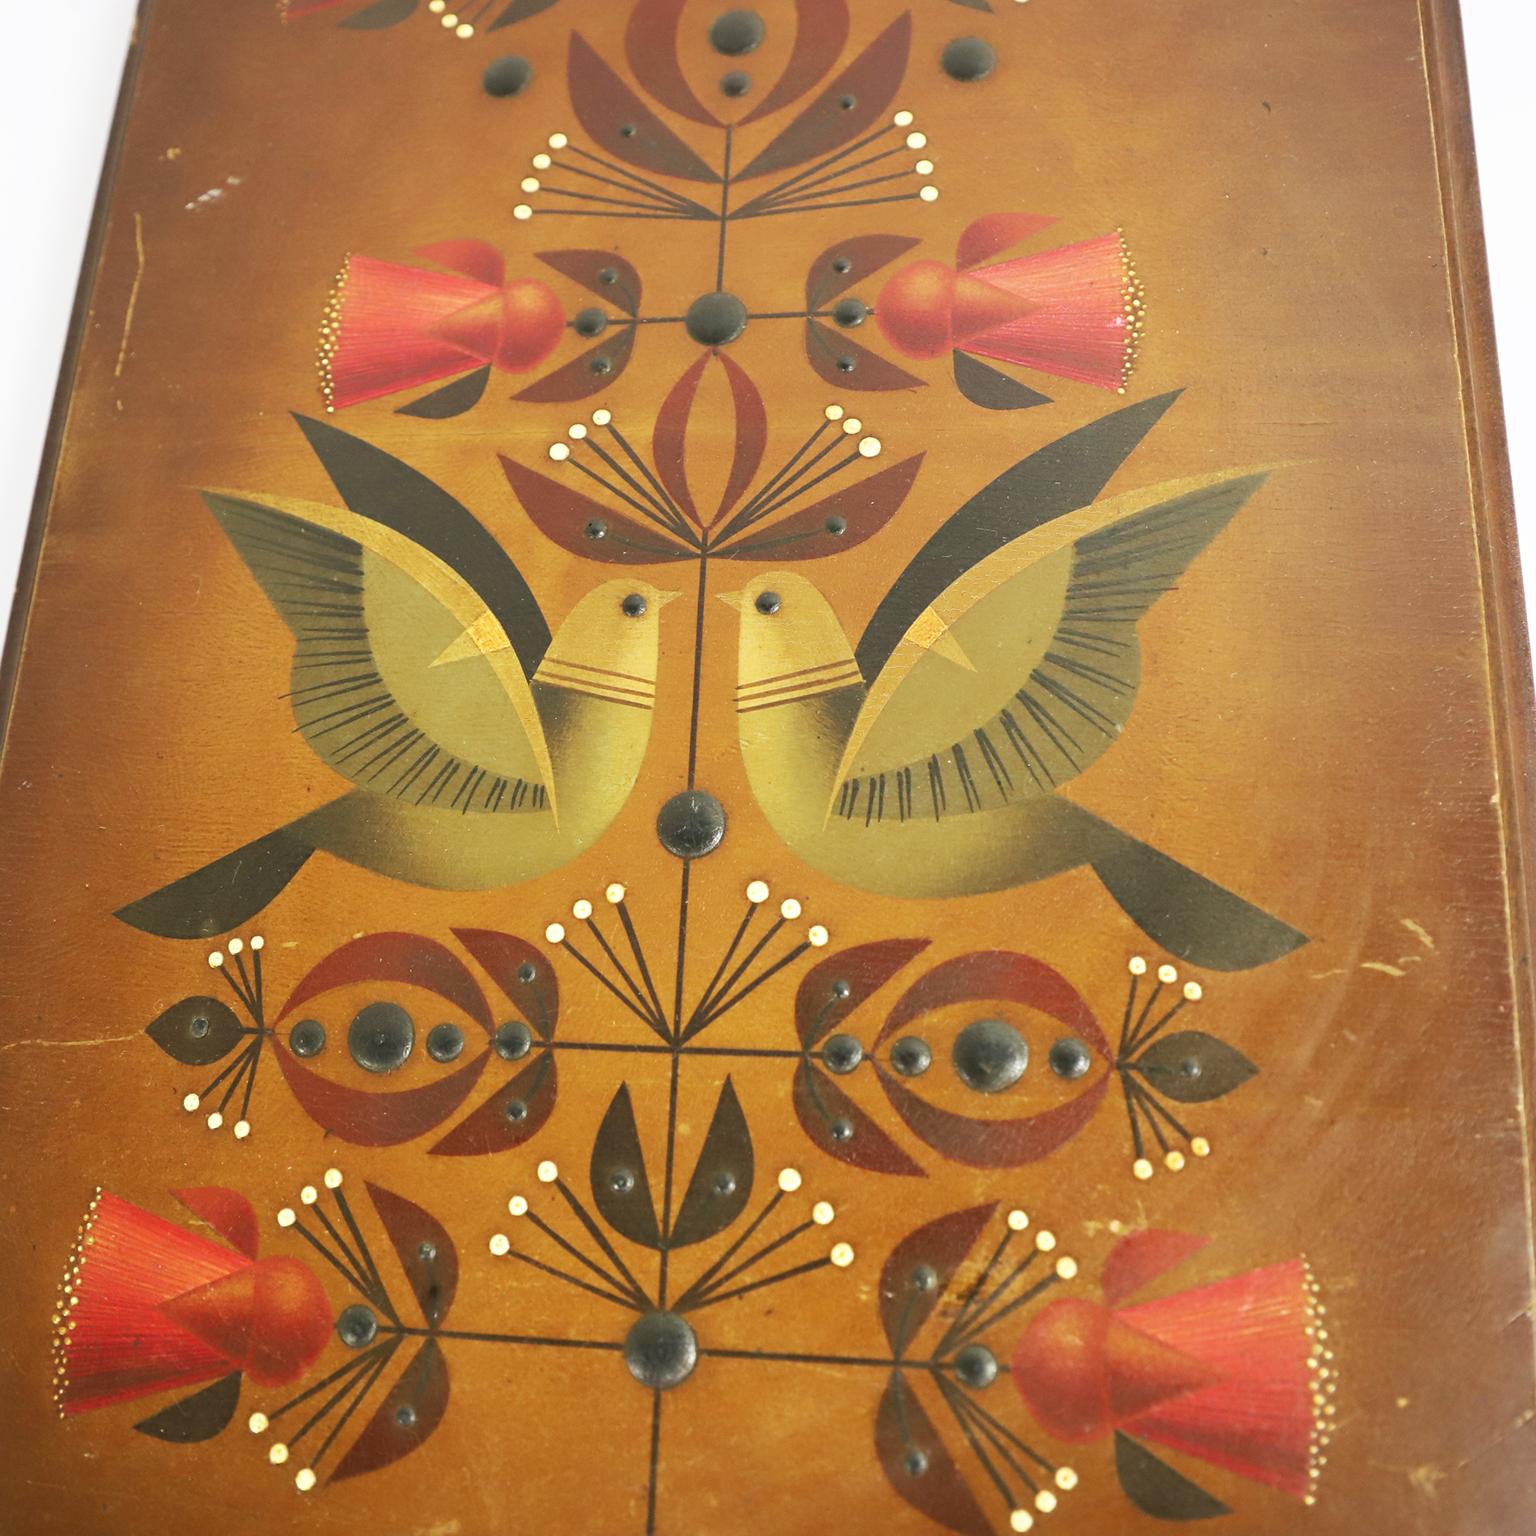 Circa 1960, We offer this fantastic Decorative Frame Hand Painted by Alejandro Rangel Hidalgo.

Alejandro Rangel Hidalgo (1923-2000) was a Mexican artist, graphic designer and artisan best known for his series of Christmas cards produced for UNICEF